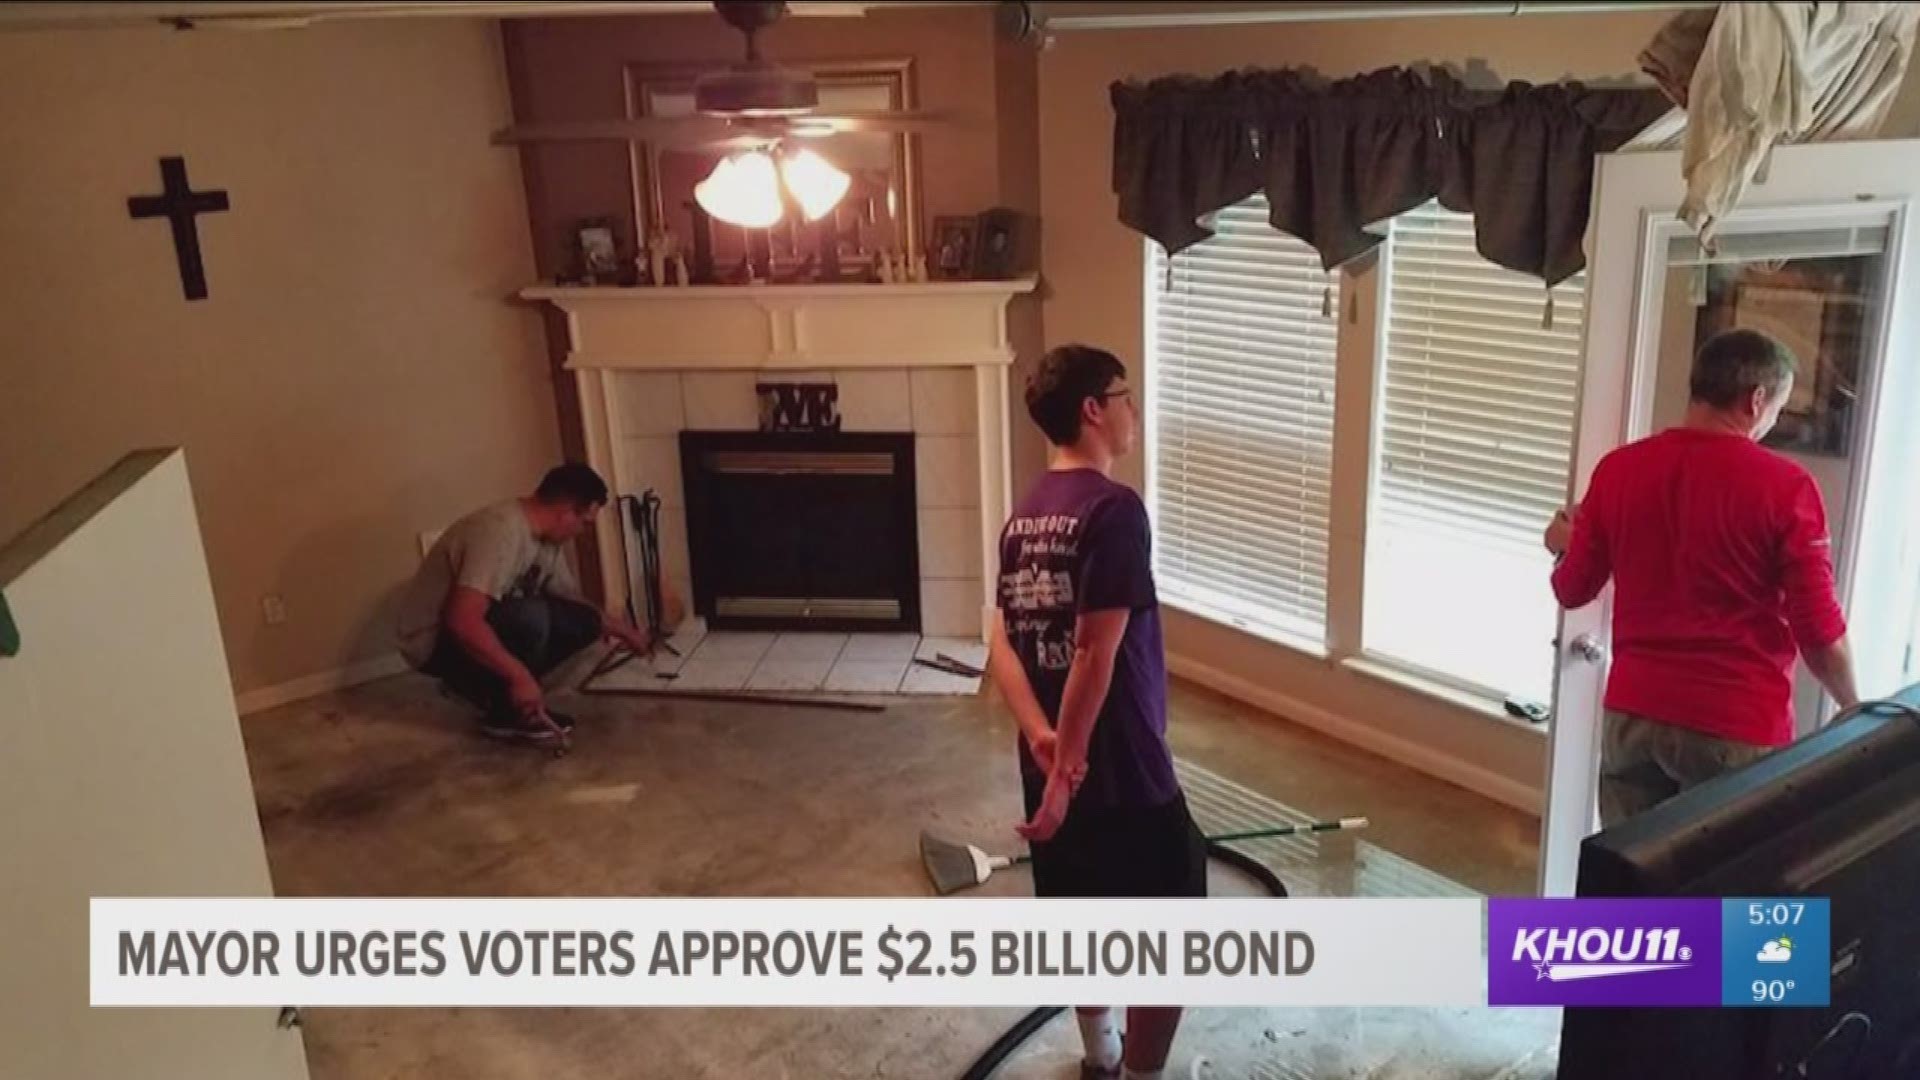 Early voting is underway and Houston area officials are keeping their fingers crossed when it comes to a flood-control bond. The mayor and Harris County judge are hoping residents approve a $2.5 billion bond.